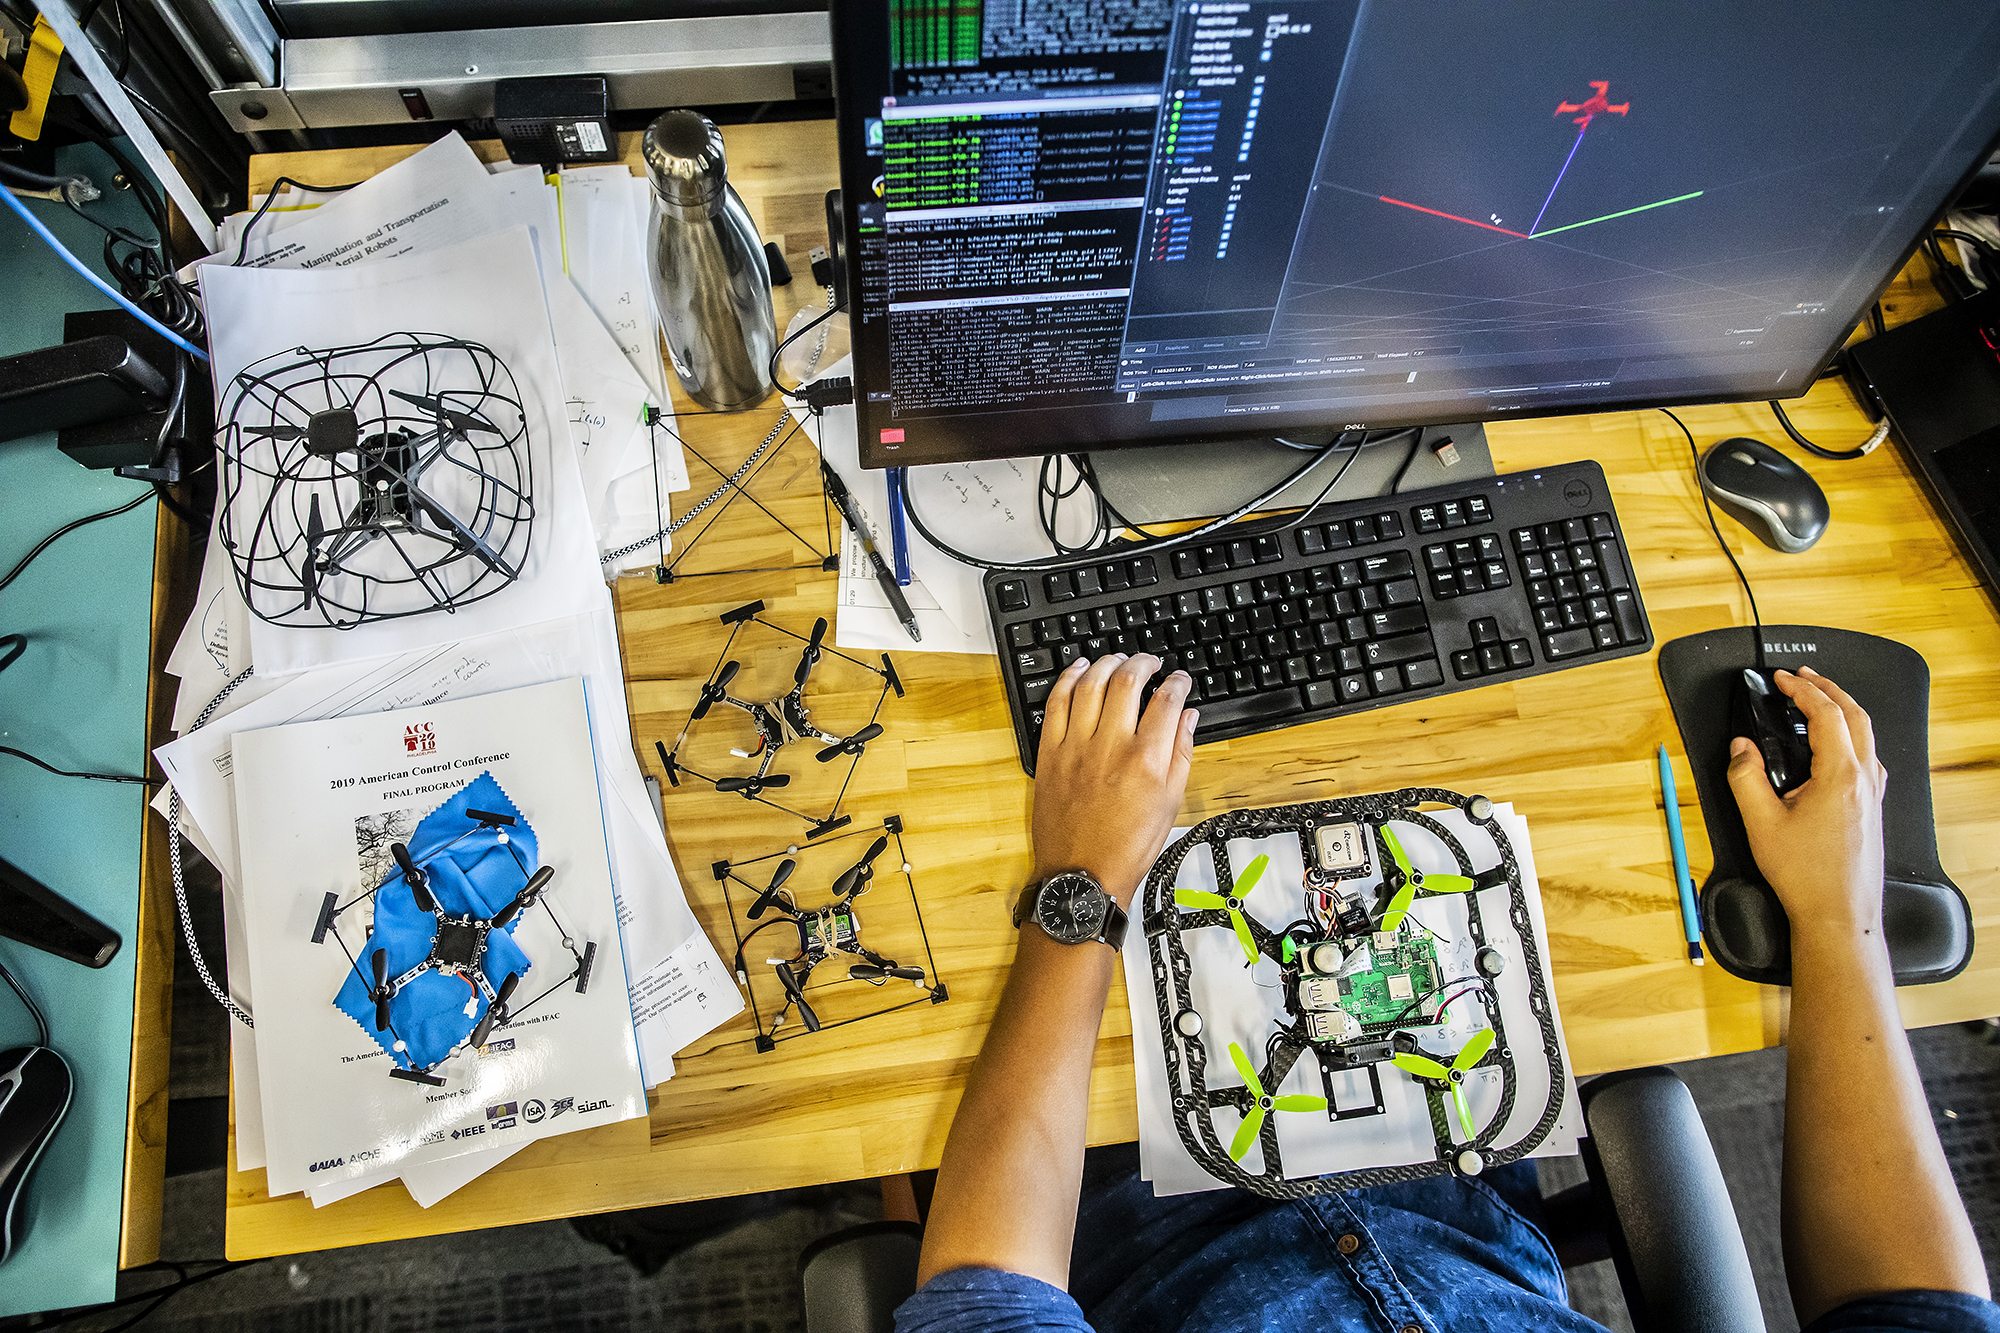 saldana working on a computer simulation of a drone surrounded by robot prototypes